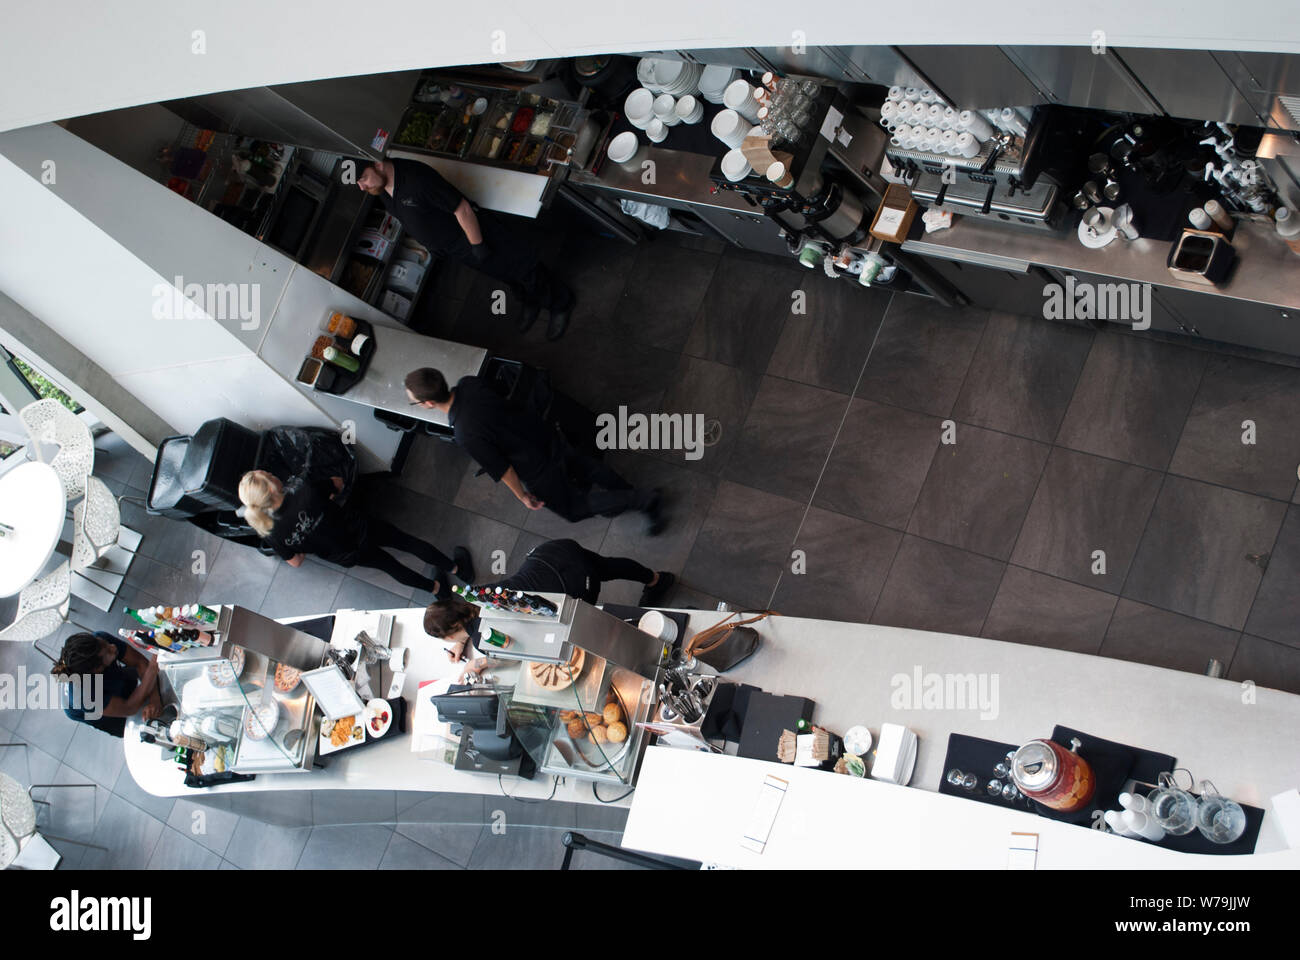 View from the top on the cafe/bar with people working Stock Photo